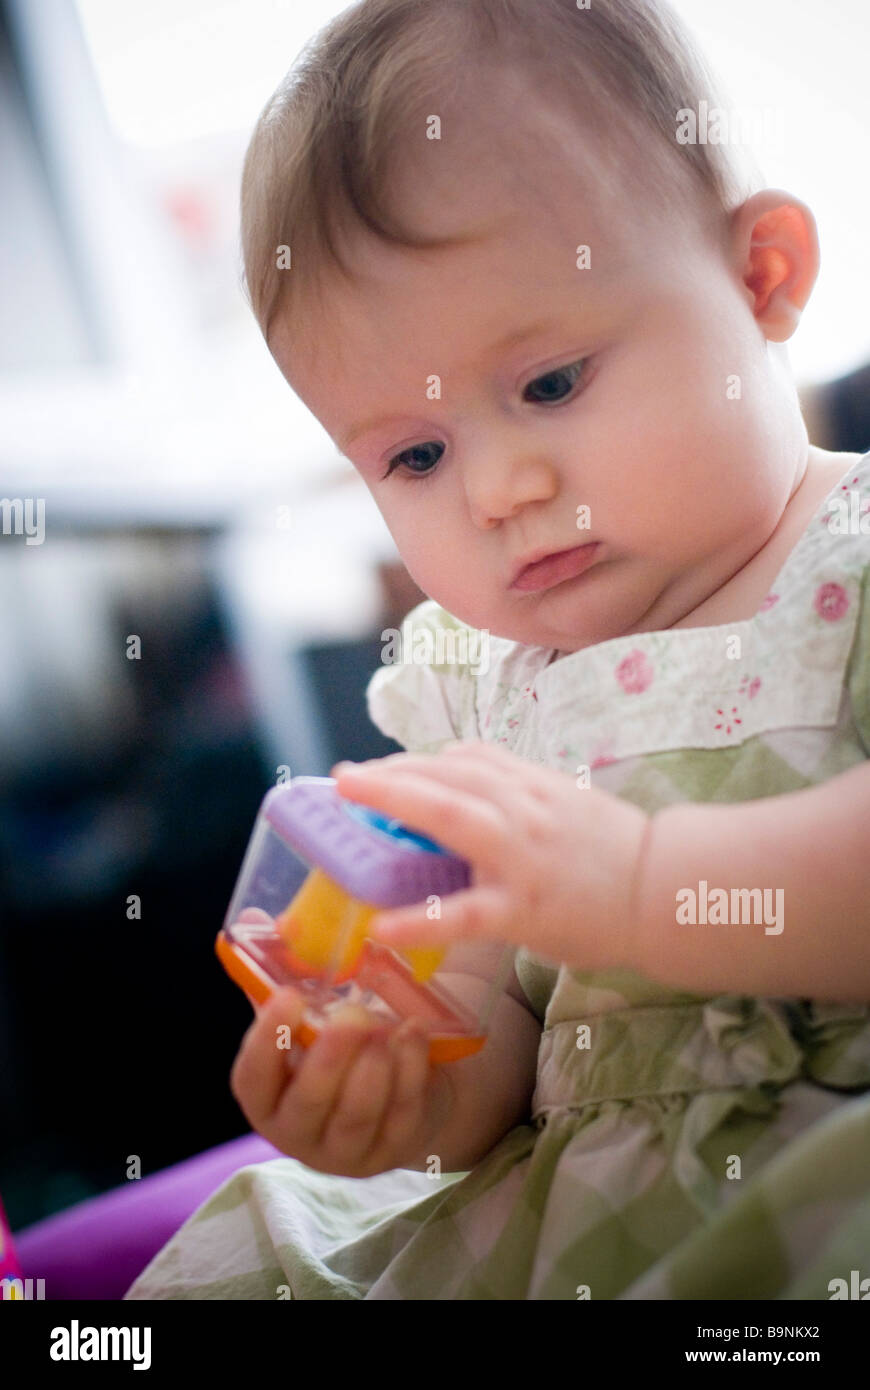 Baby girl playing with toy Stock Photo